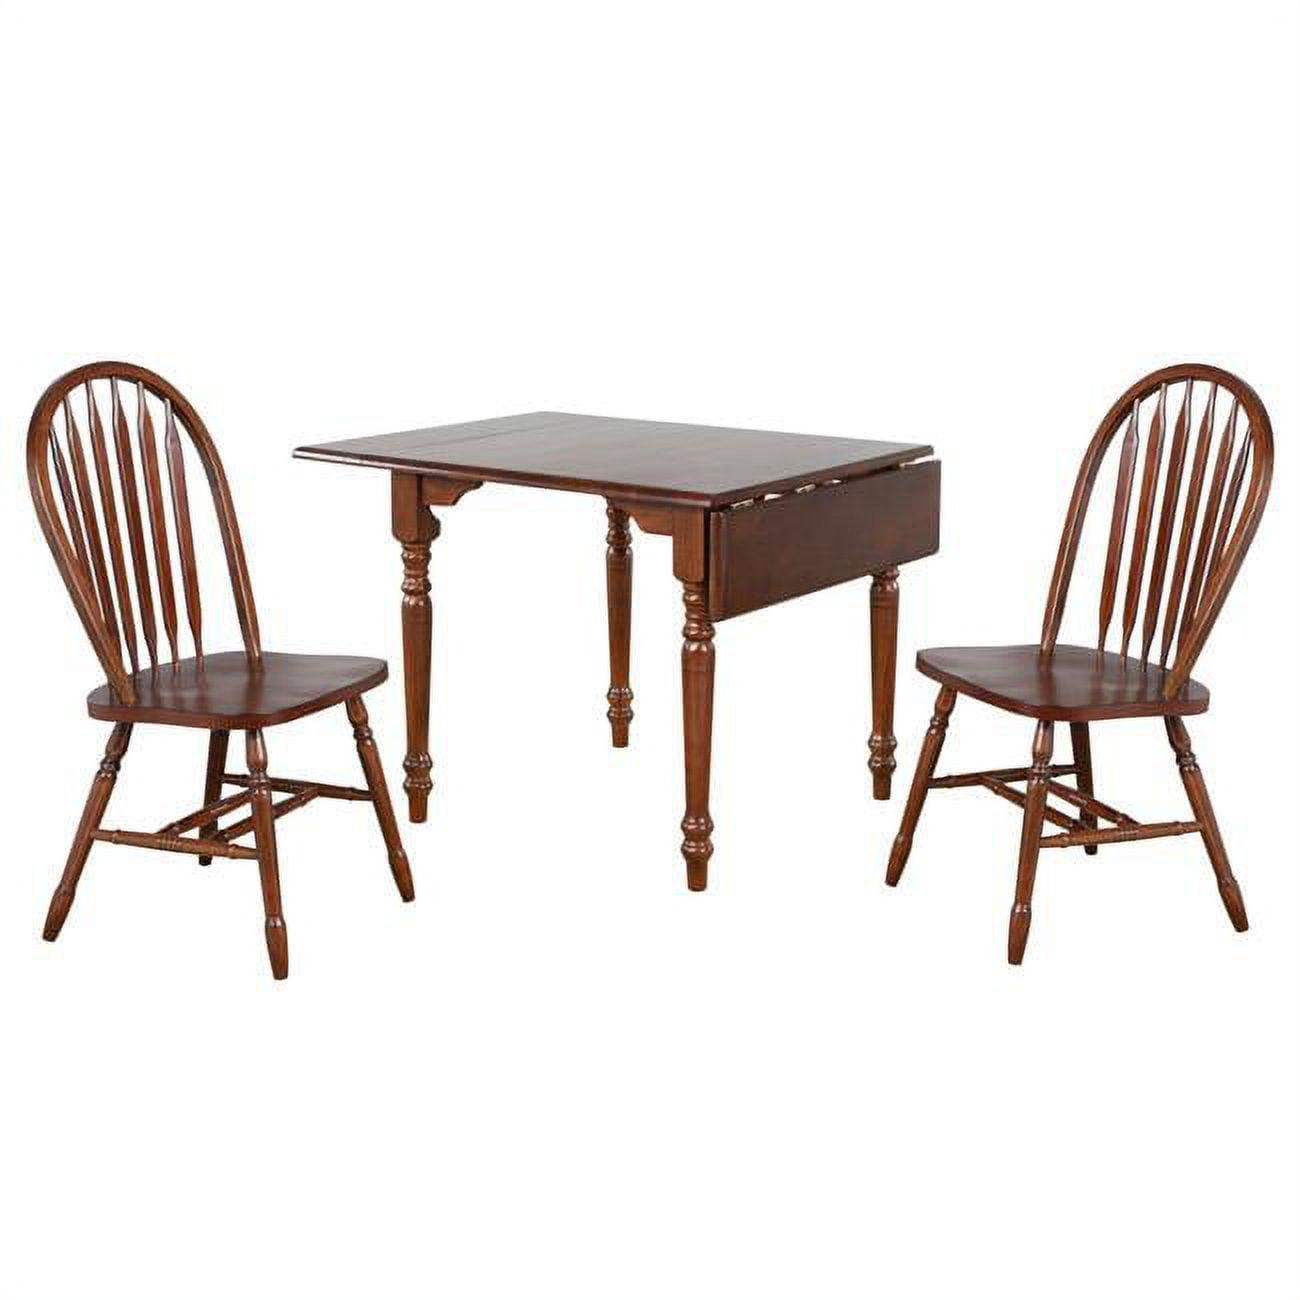 Cottage Charm Chestnut Brown Wood Dining Set with 2 Chairs